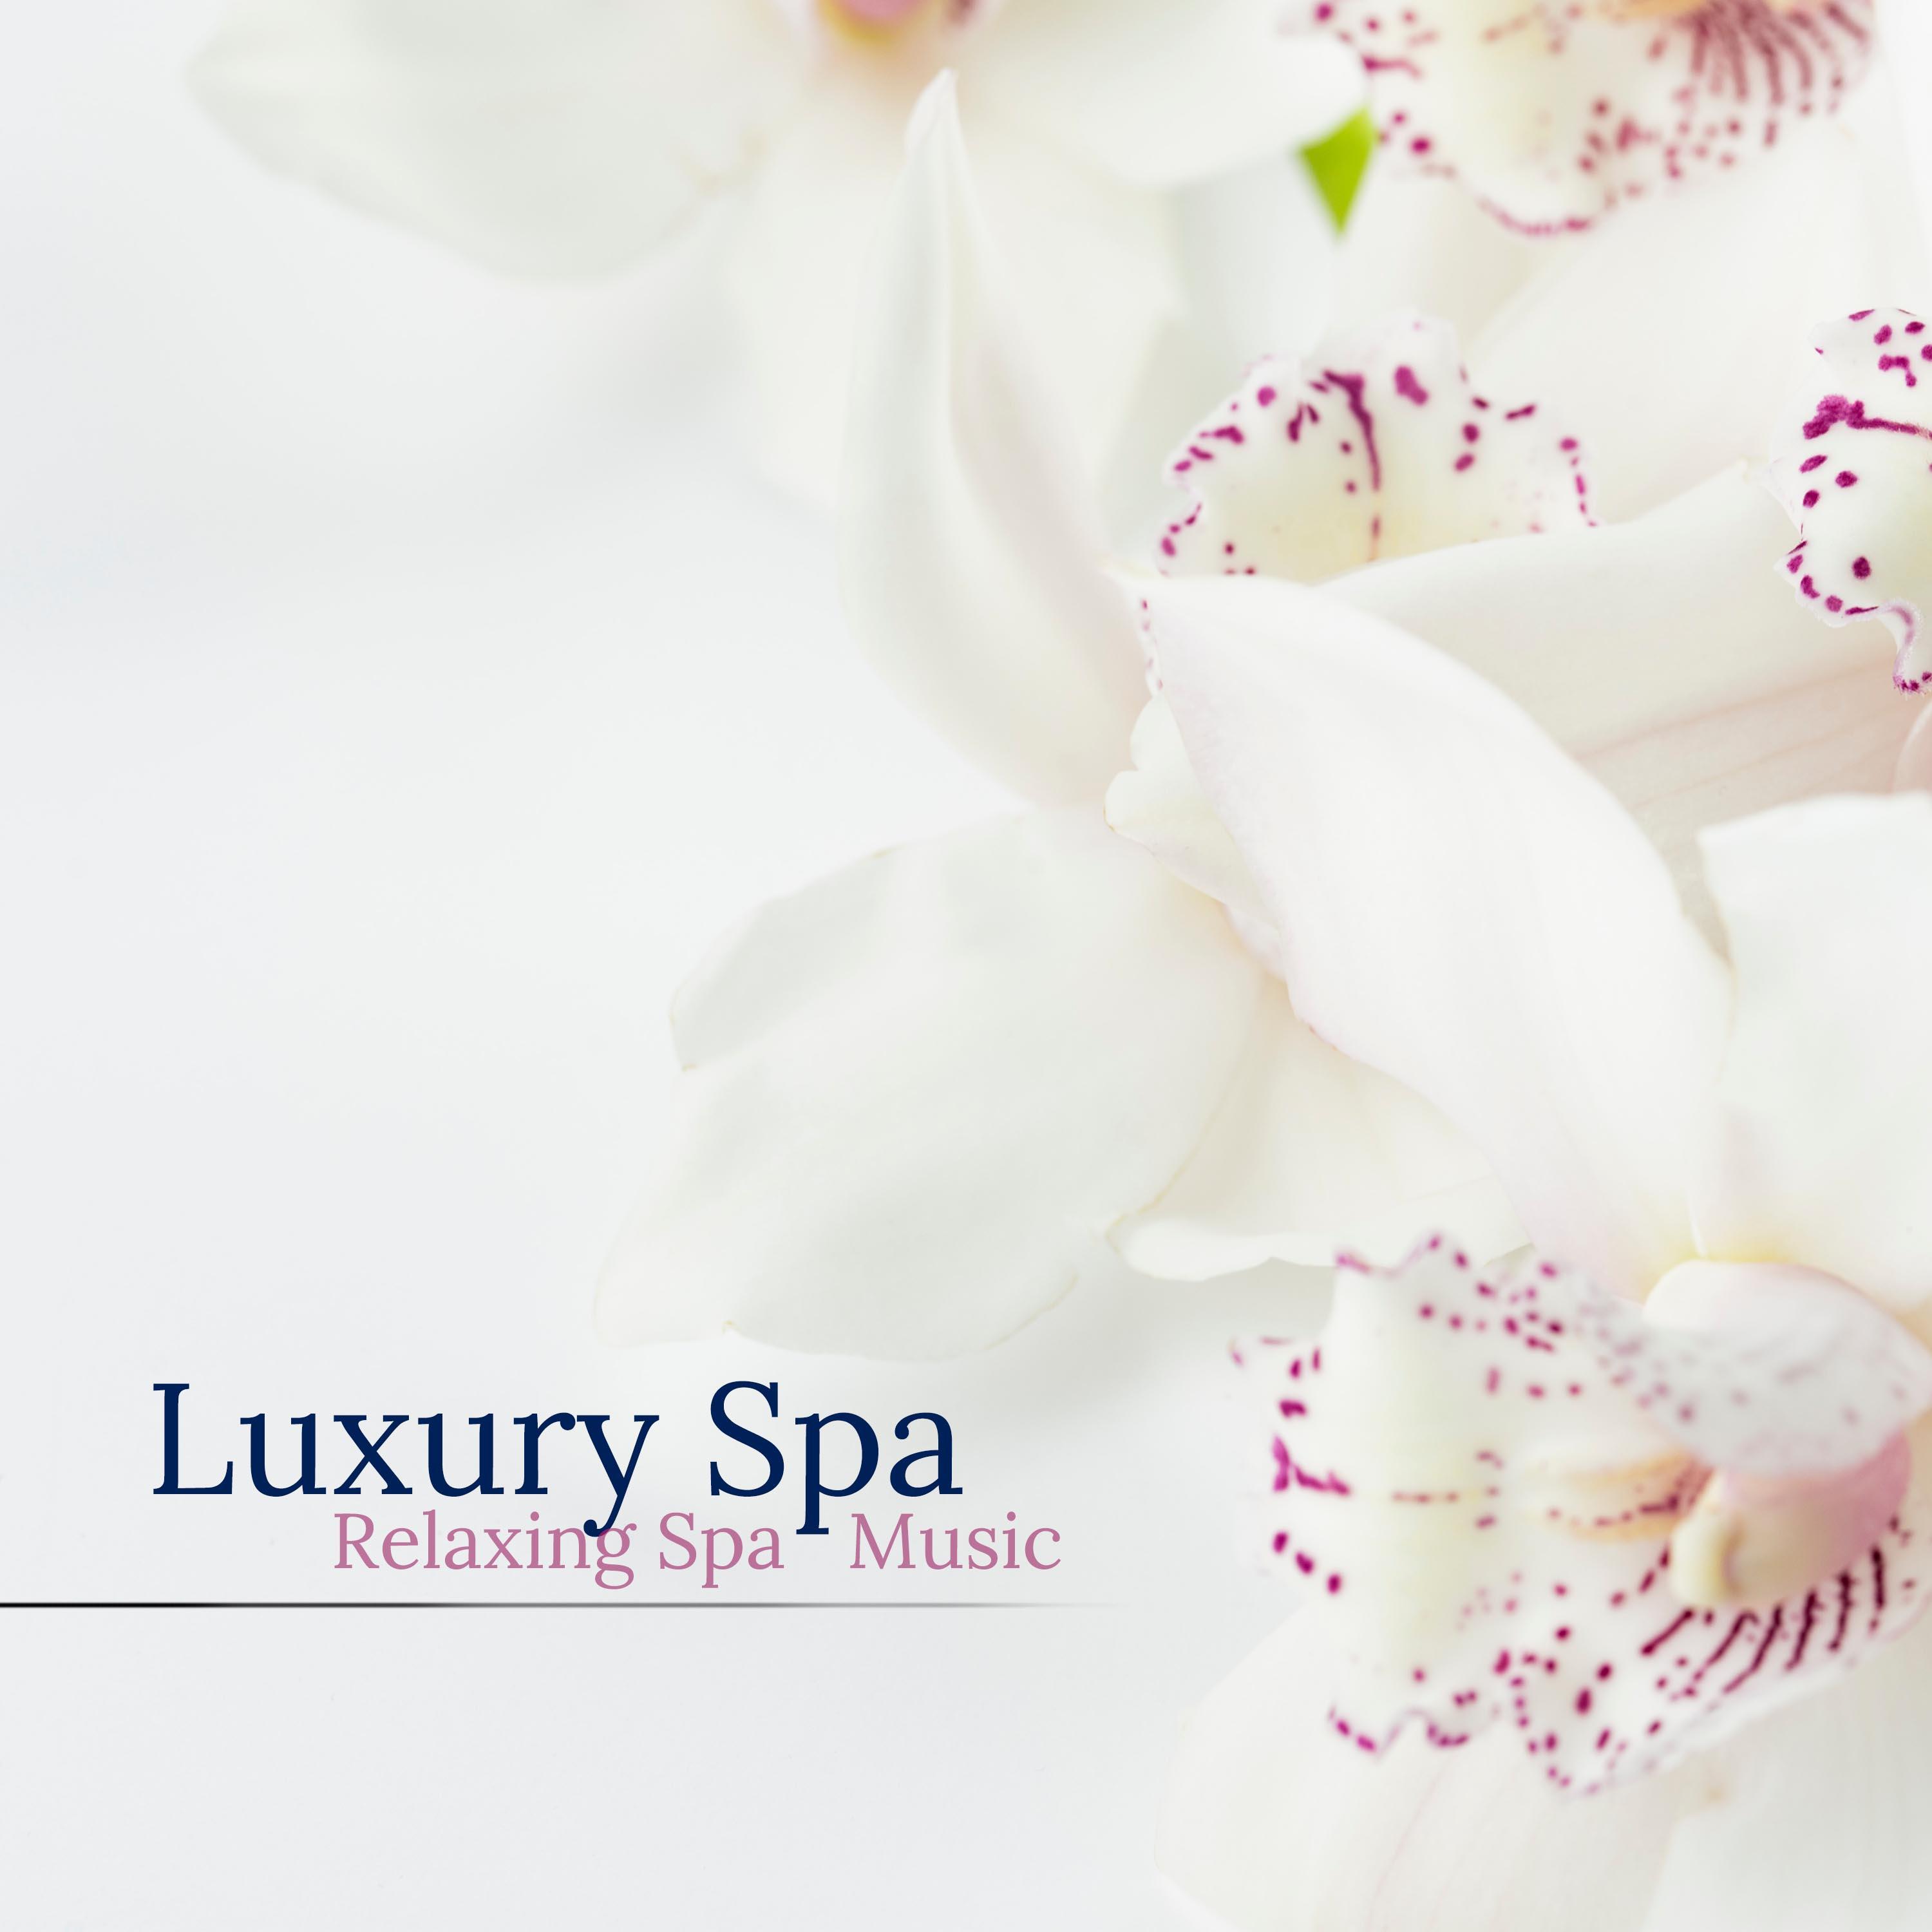 Luxury Spa: the Finest Relaxing Spa Music with Nature Sounds for Aromatherapy Massage, Remedial Massage, Shoulder Massage, Massage Salon, Spa Services